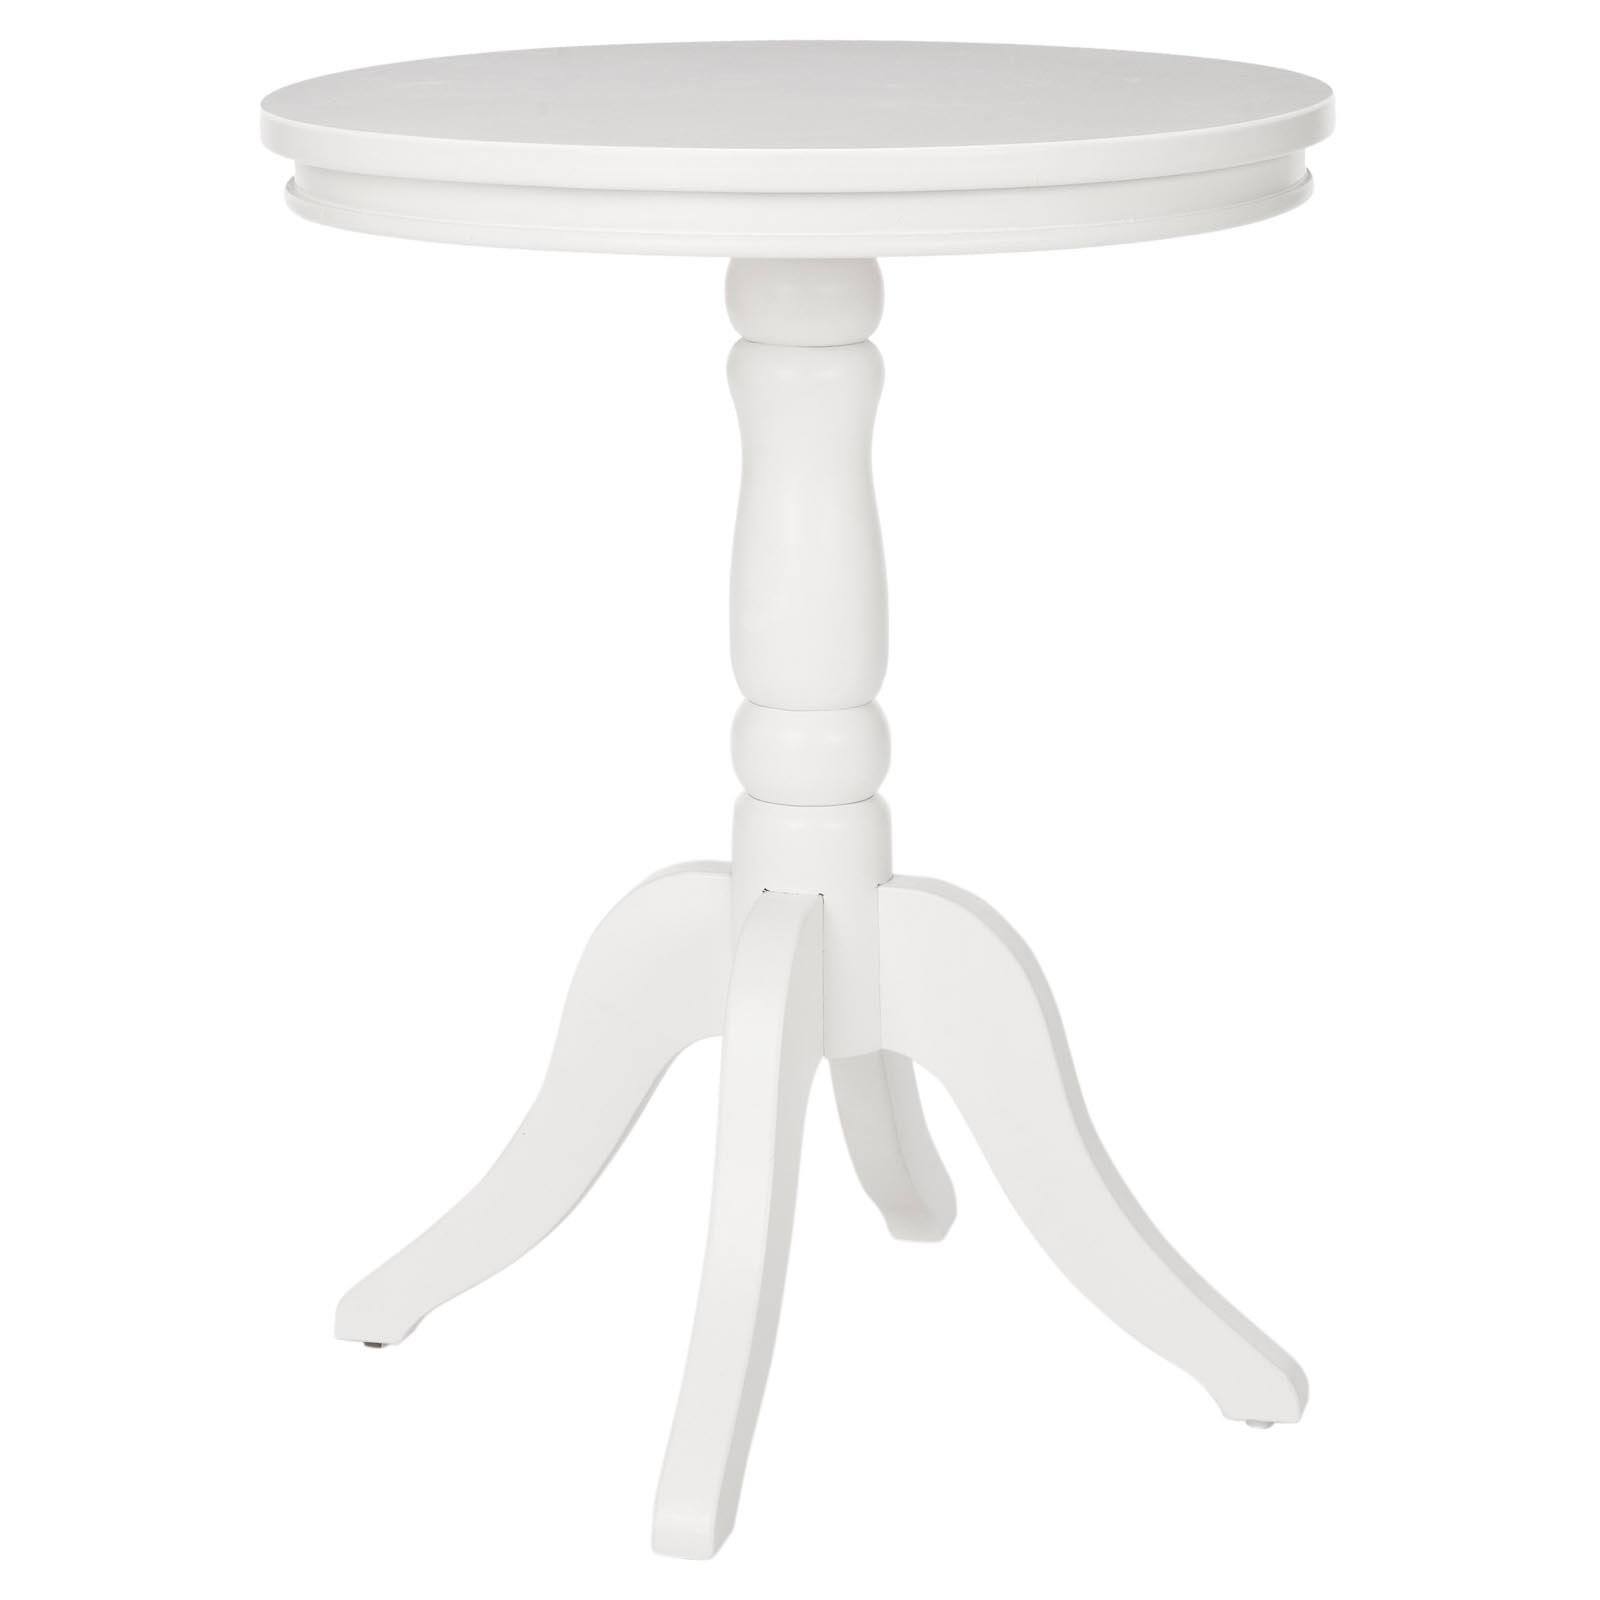 Safavieh Juliet Pine Wood Side Table in White - image 1 of 5